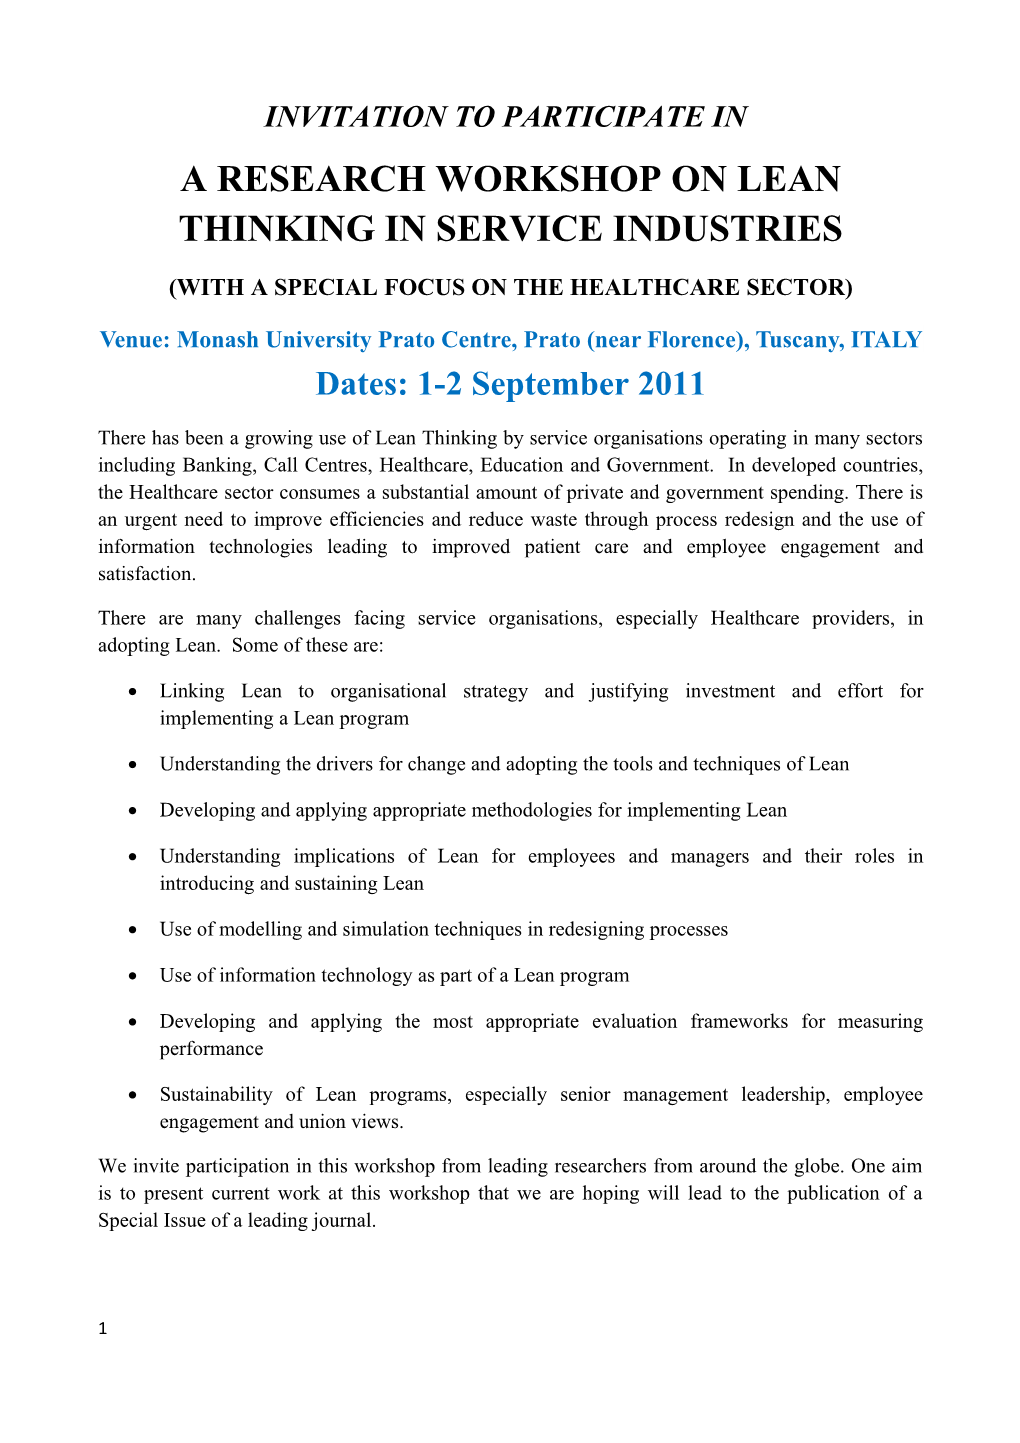 A Research Workshop on Lean Thinking in Service Industries